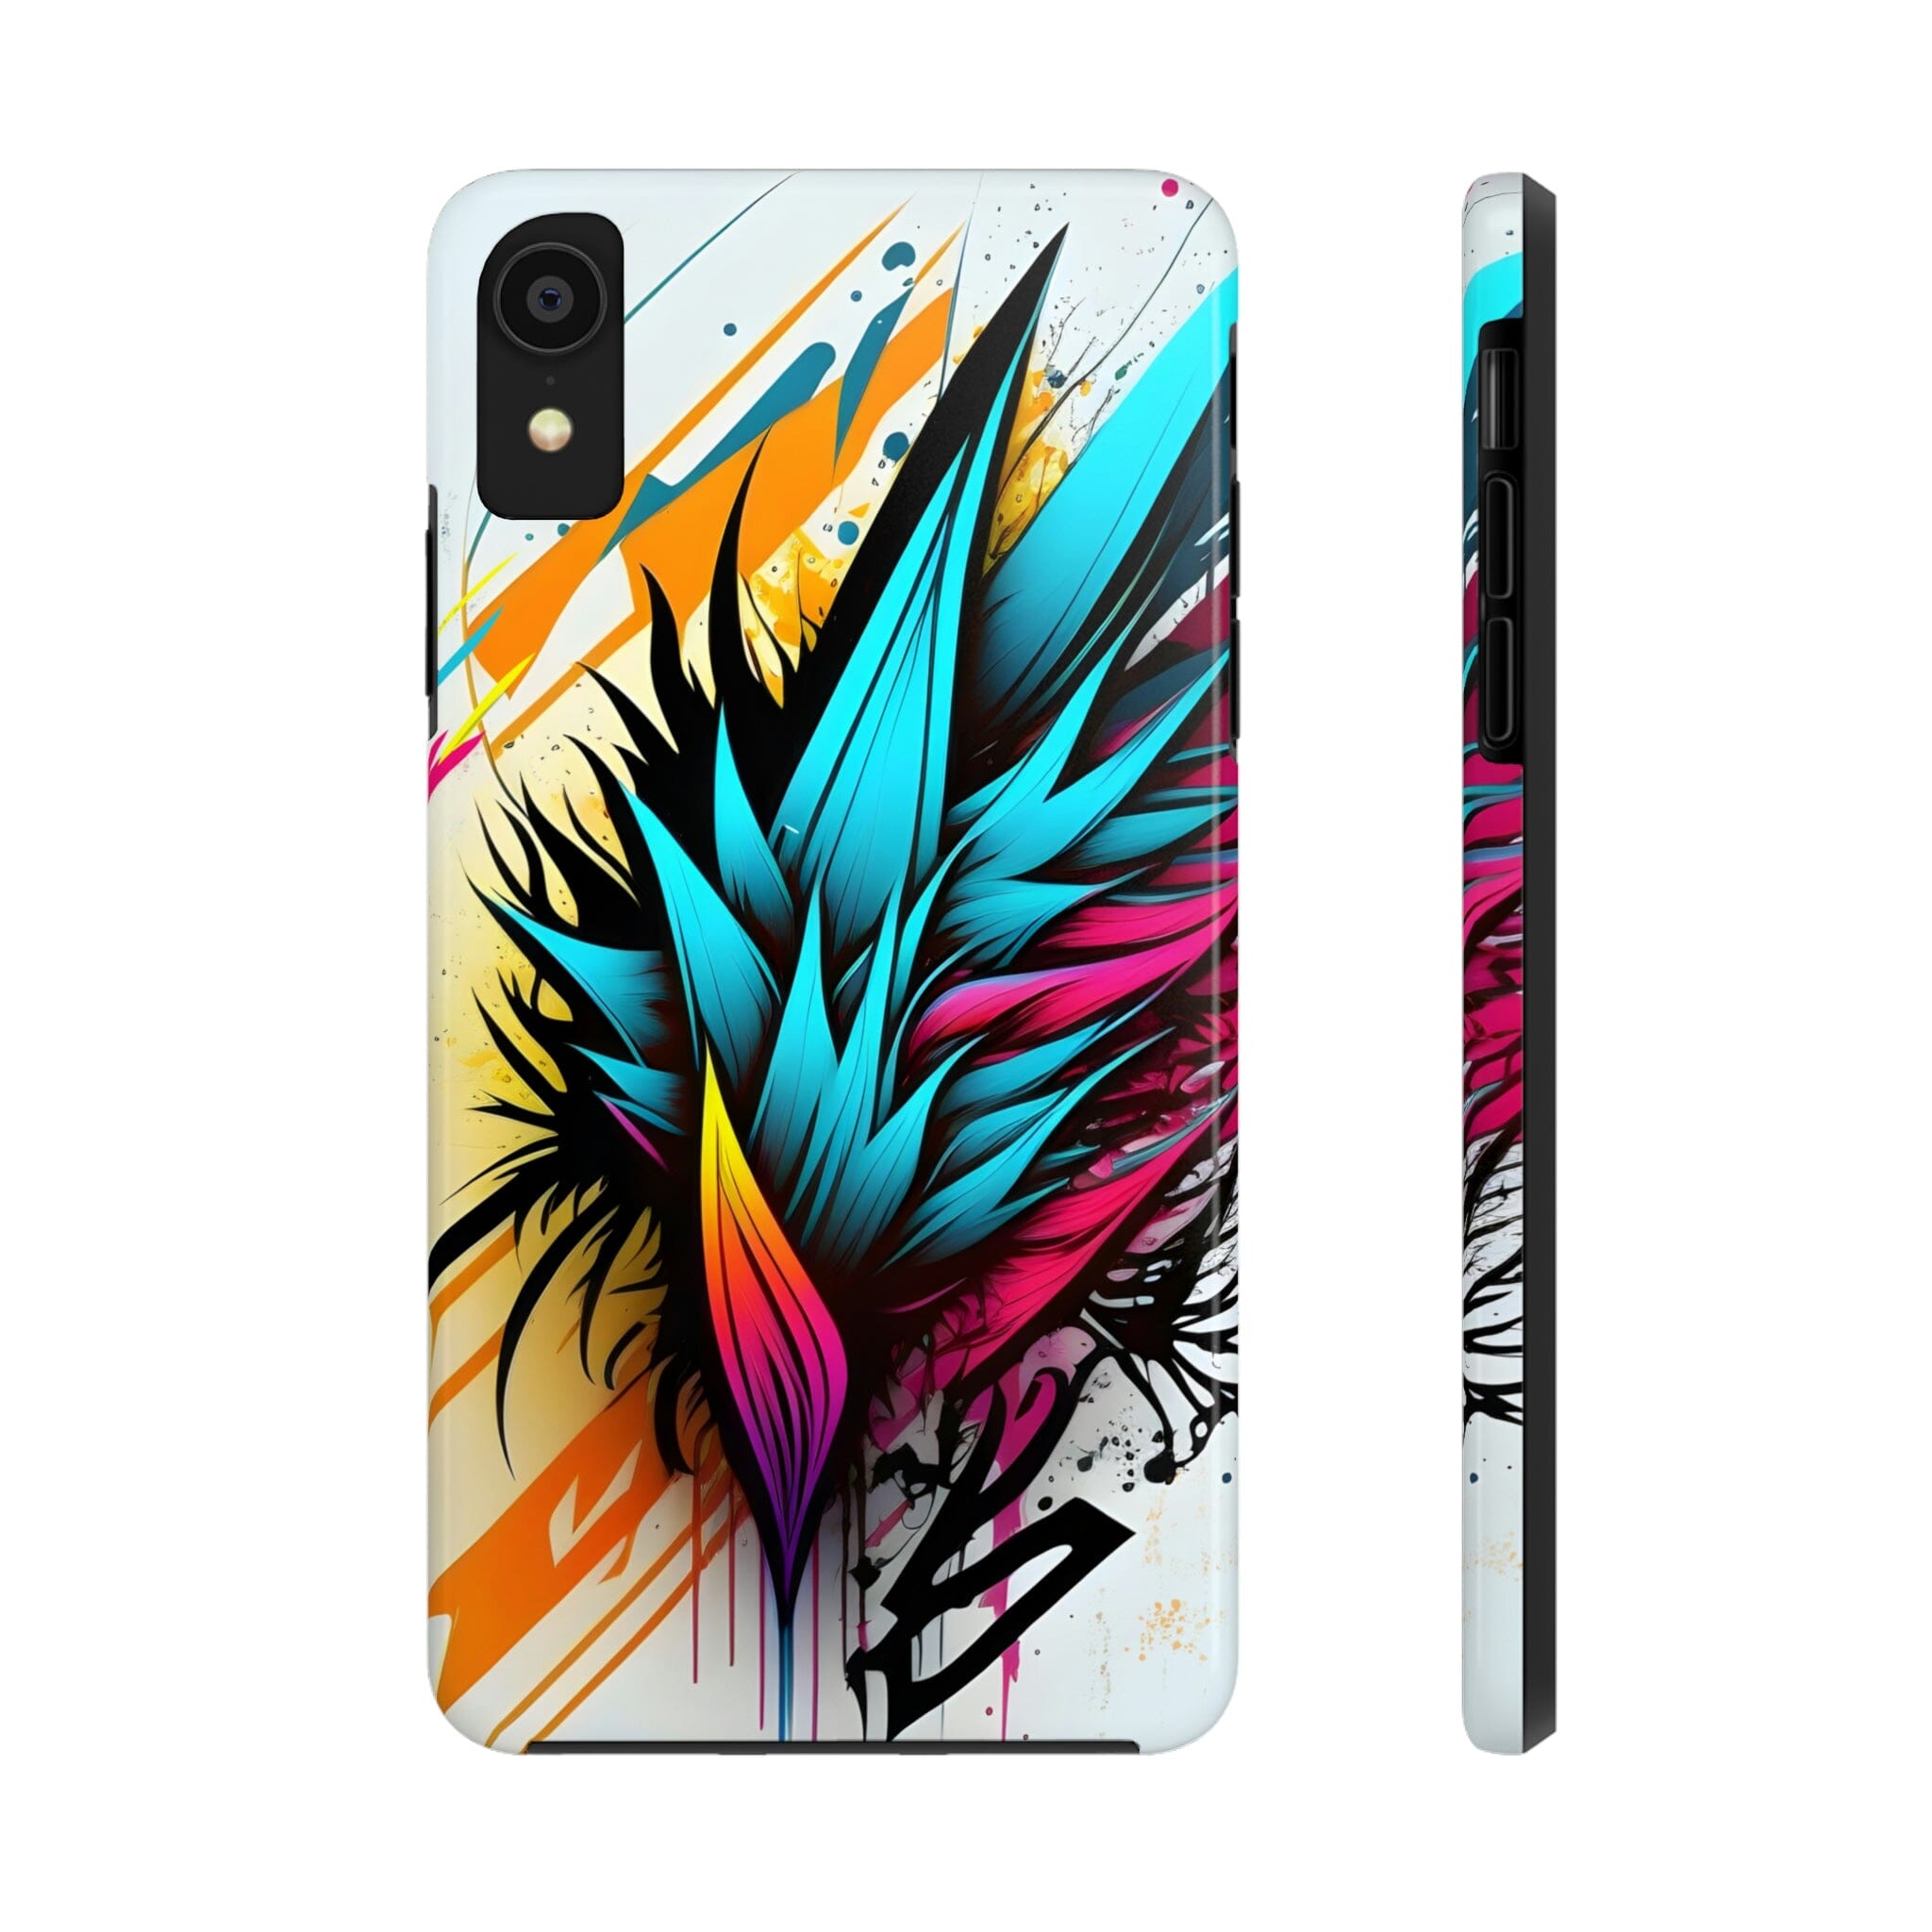 Skull Crow and Roses iPhone Case by Ben Krefta - Pixels